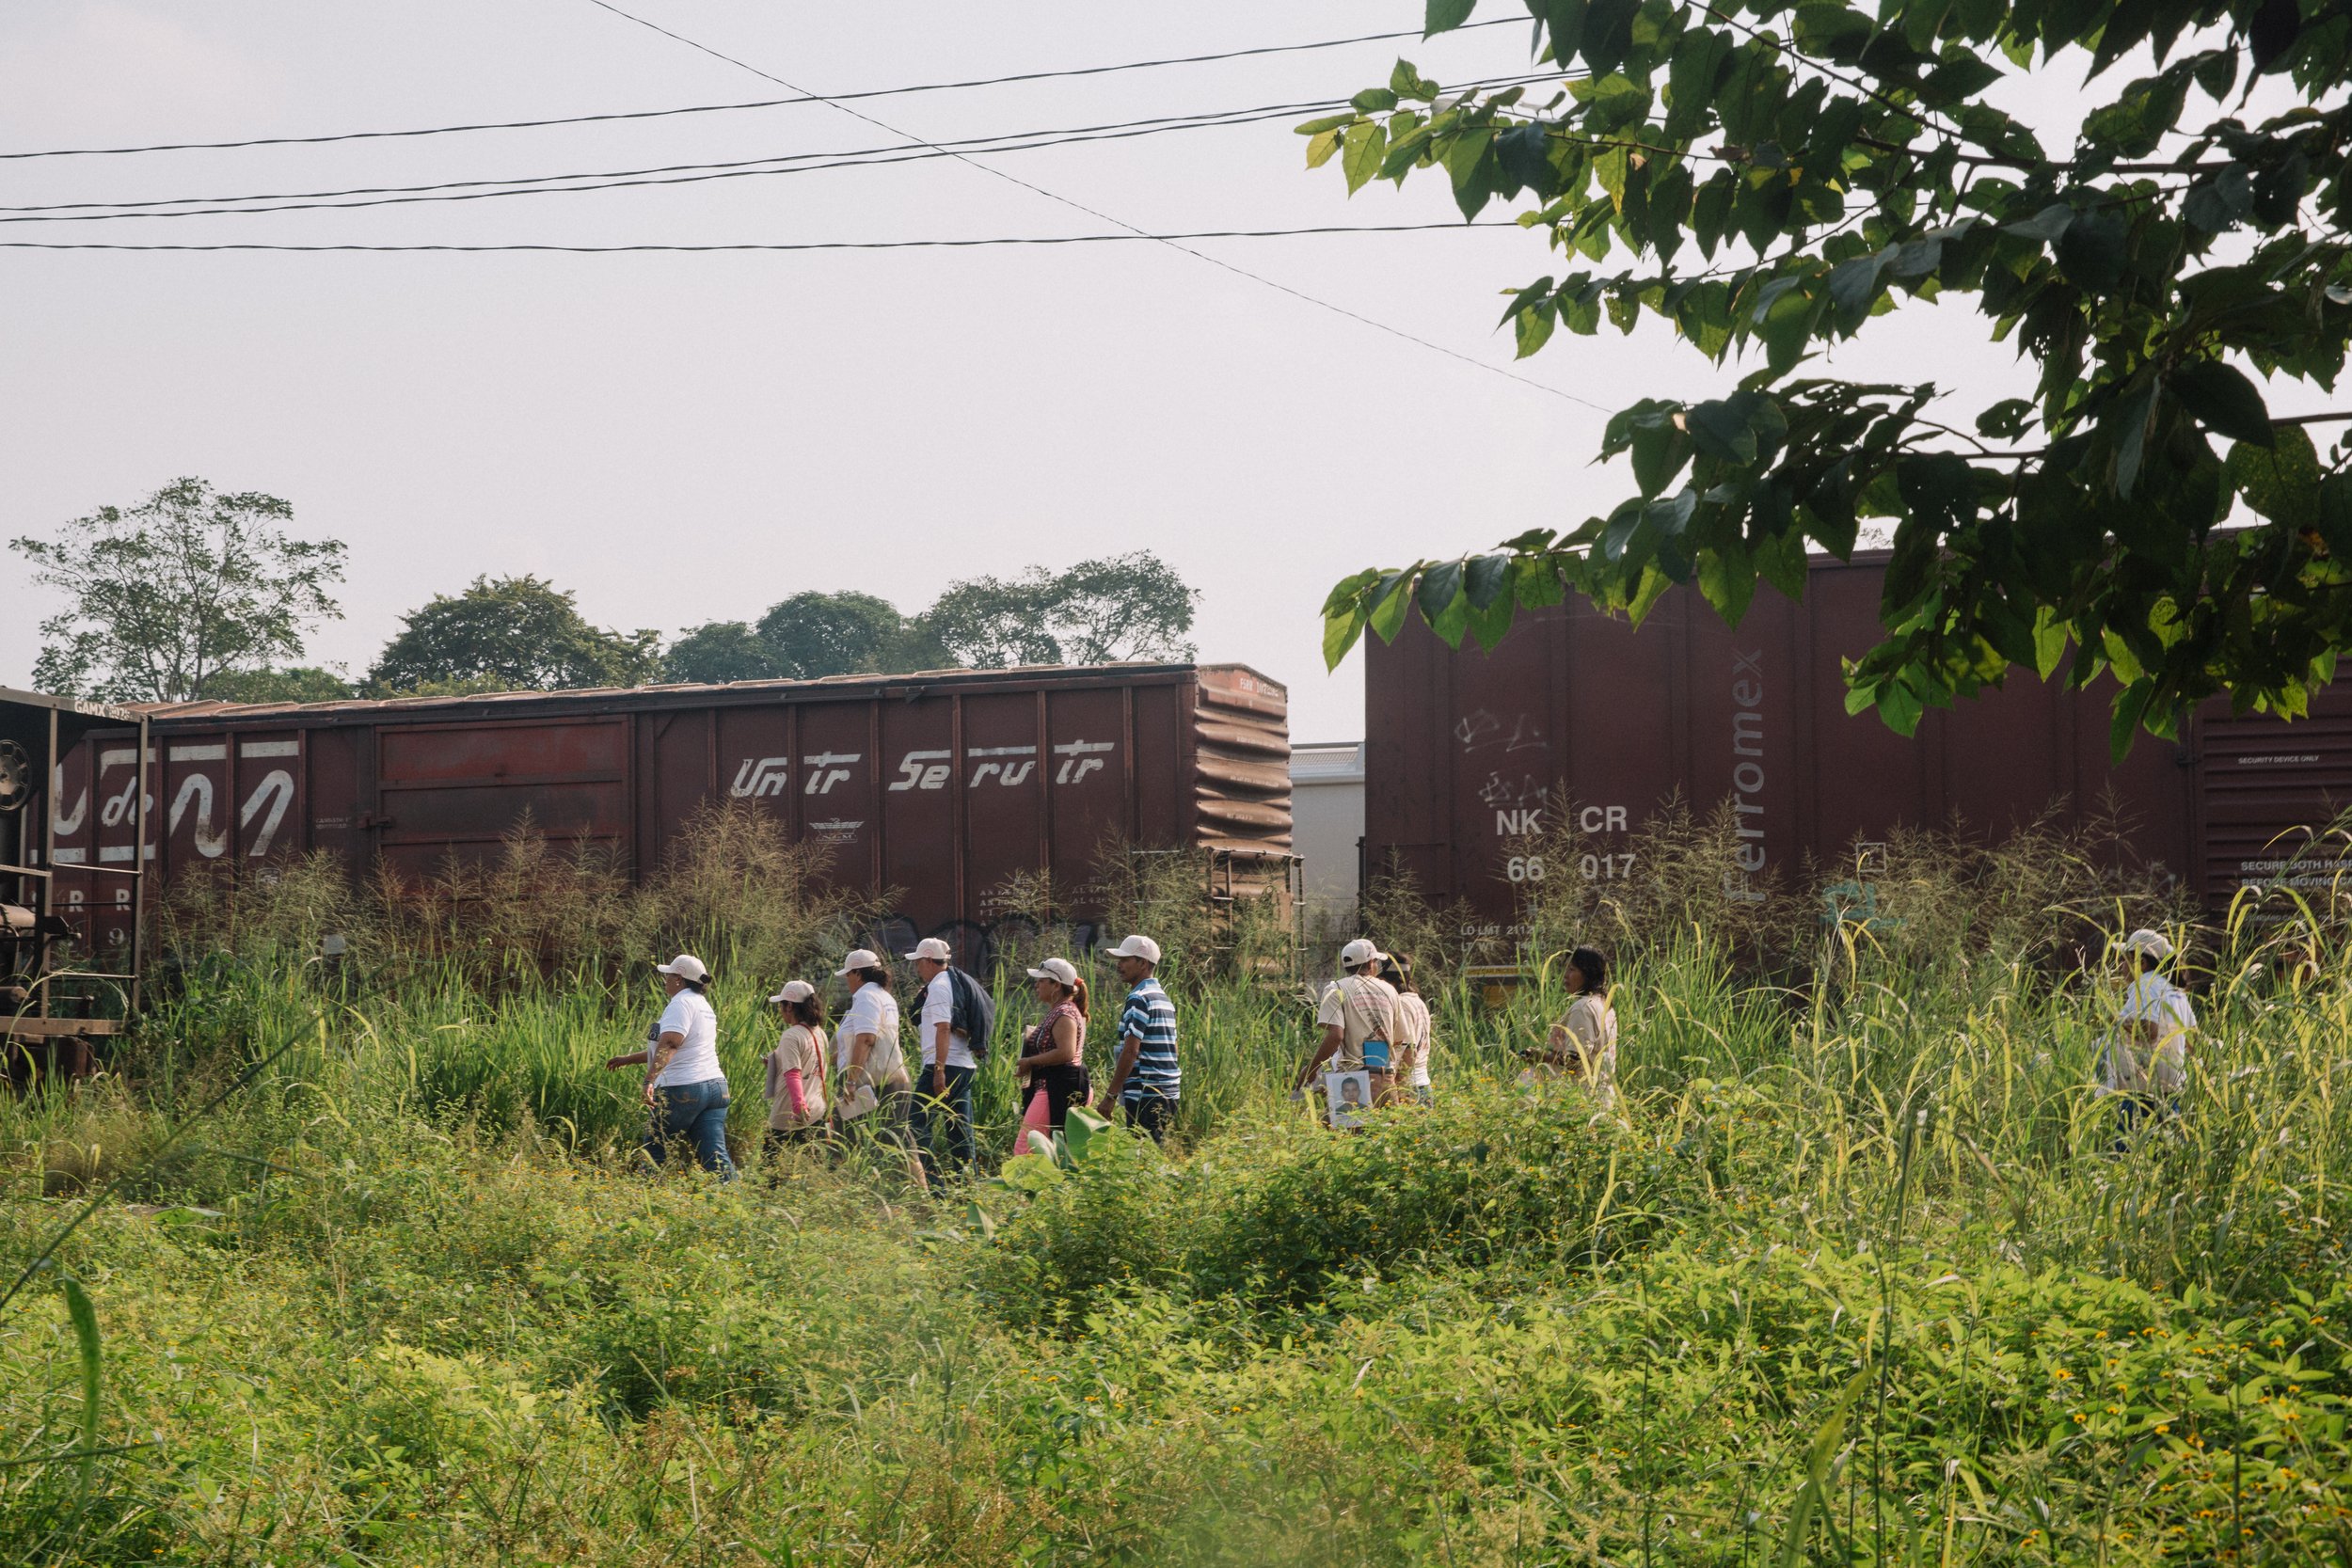  As the mothers journey through Mexico in search of their missing loved ones, the caravan of mothers splits into smaller groups to speak with people in neighborhoods along the train tracks that frequently carry migrants through the country in Villa E